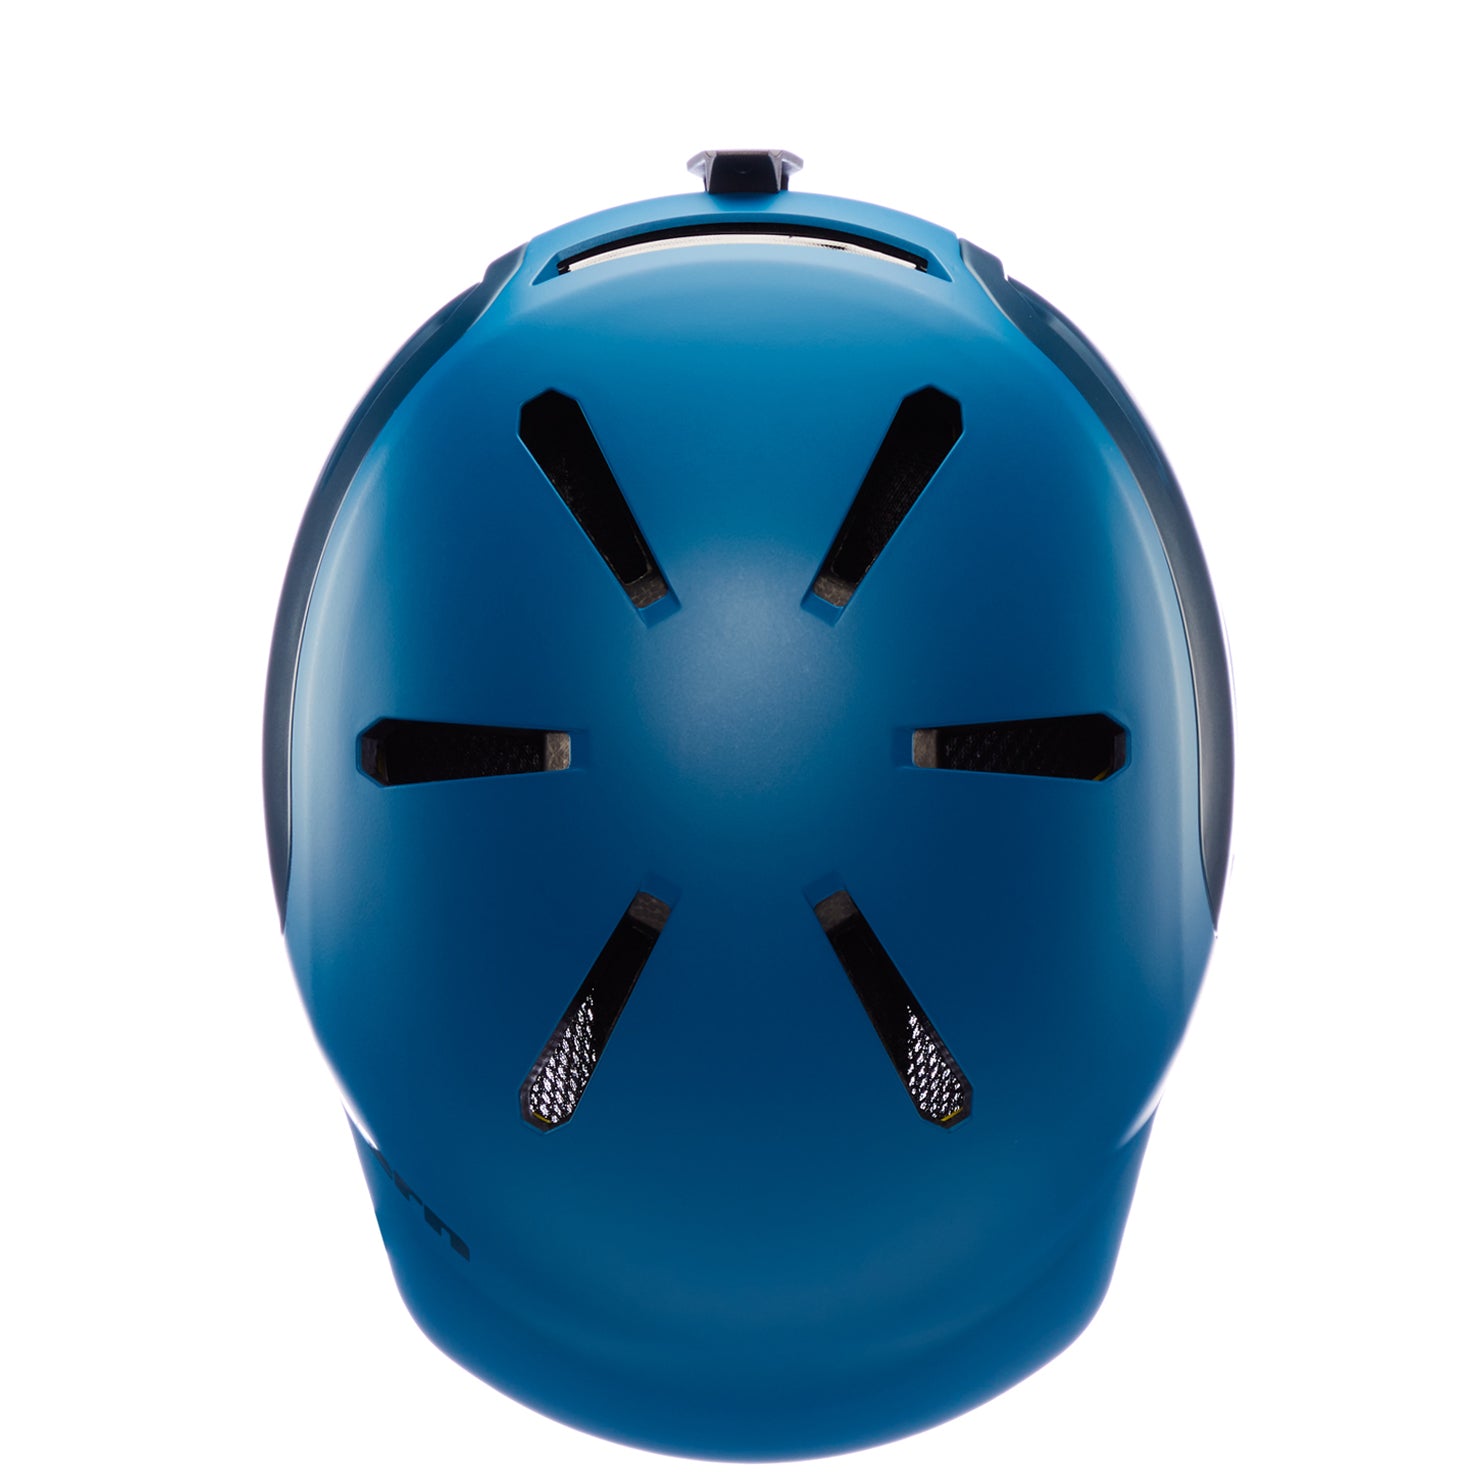 Watts 2.0 Winter Helmet with Compass Fit